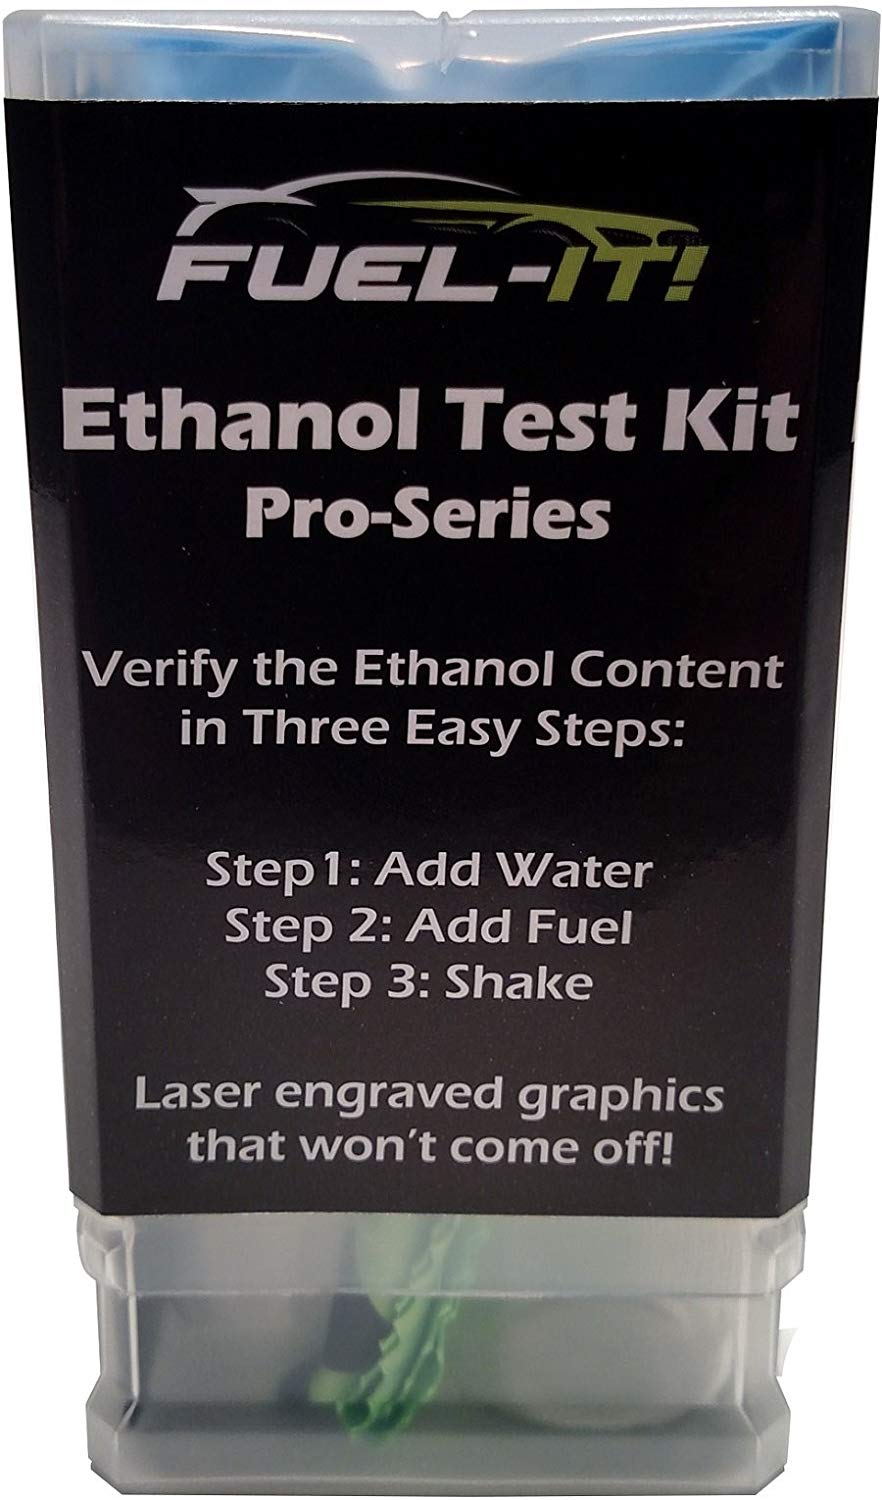 Pro-Series Ethanol Test Kit with 2 Reusable Testers for Ethanol, E85, Gasoline, Race Gas, Ethanol-Free Fuel Tester